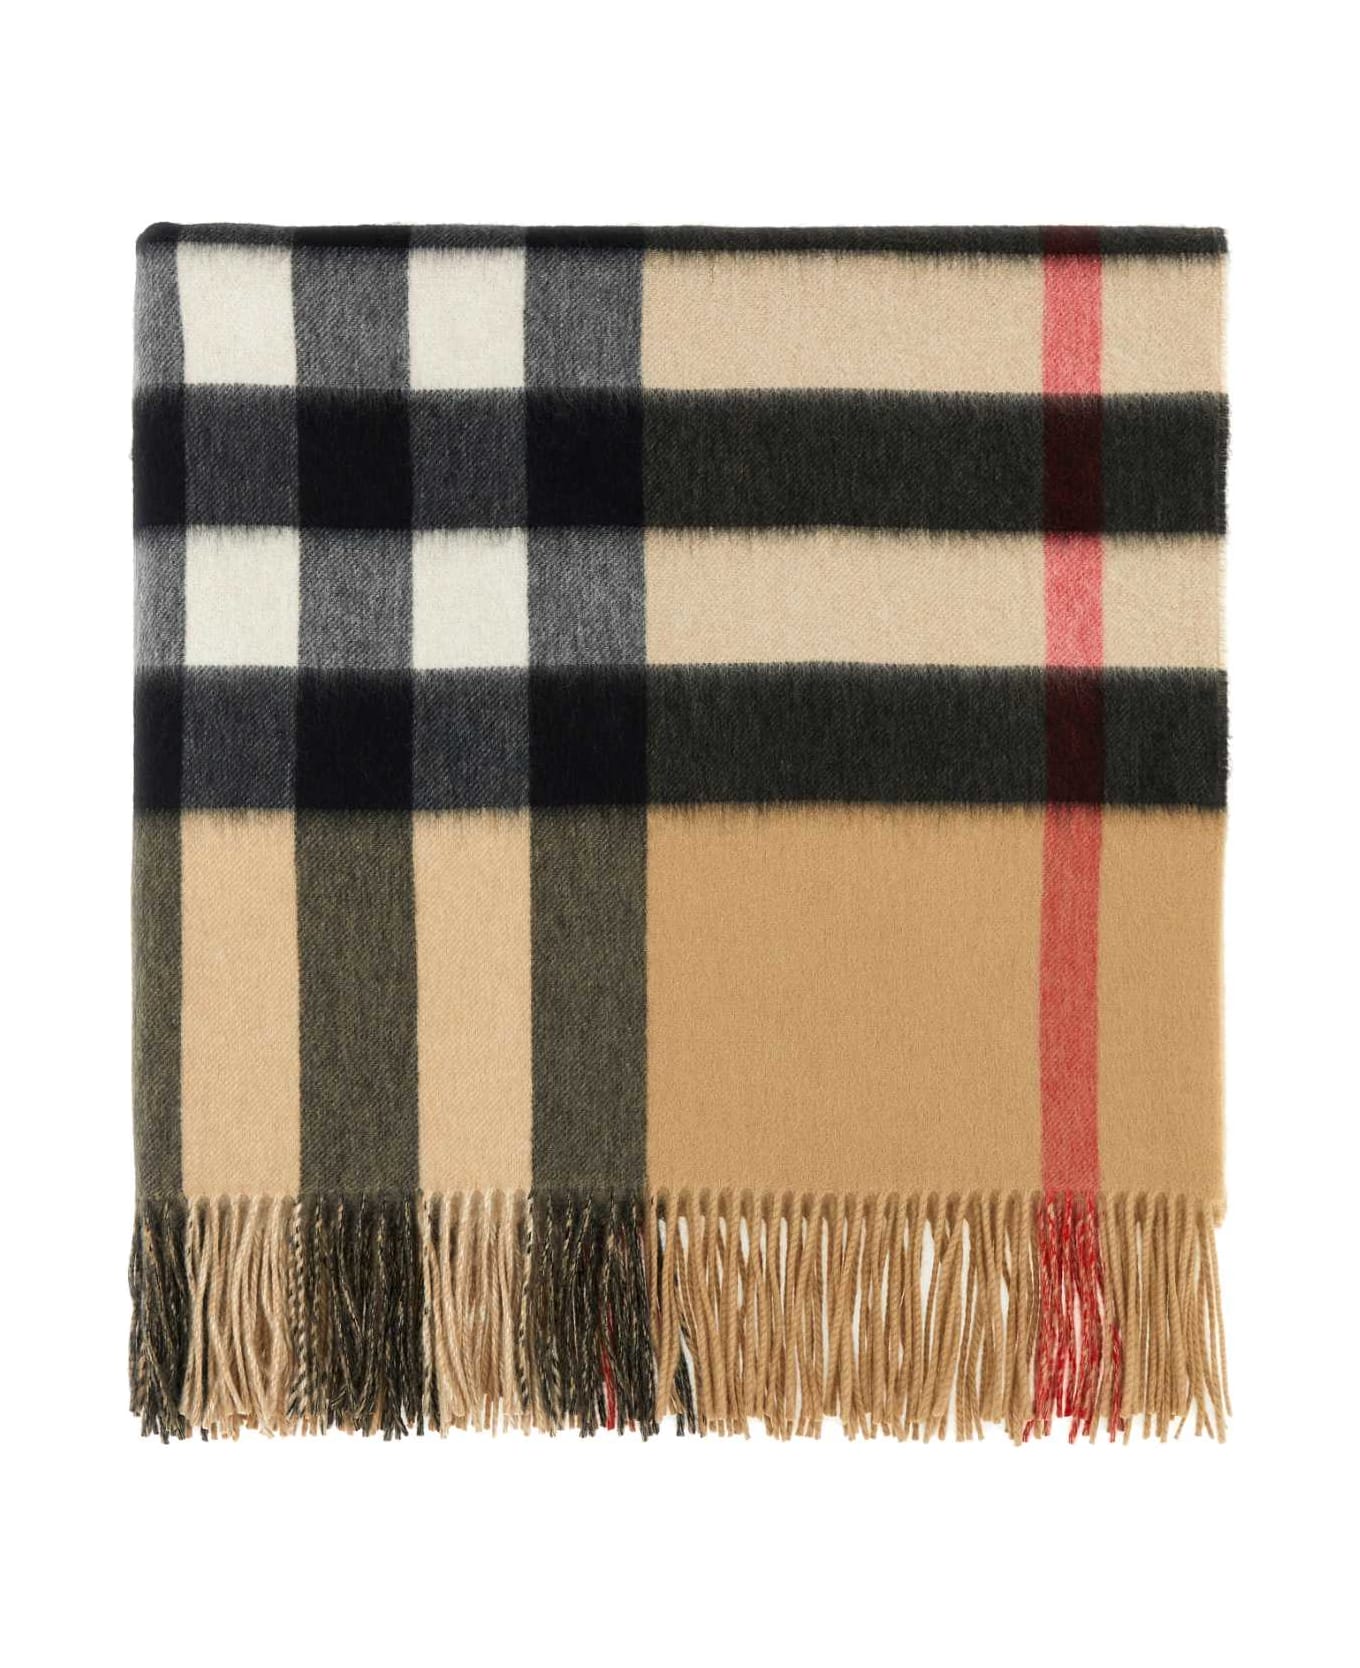 Burberry Embroidered Cashmere Blanket - ARCHIVEBEIGE